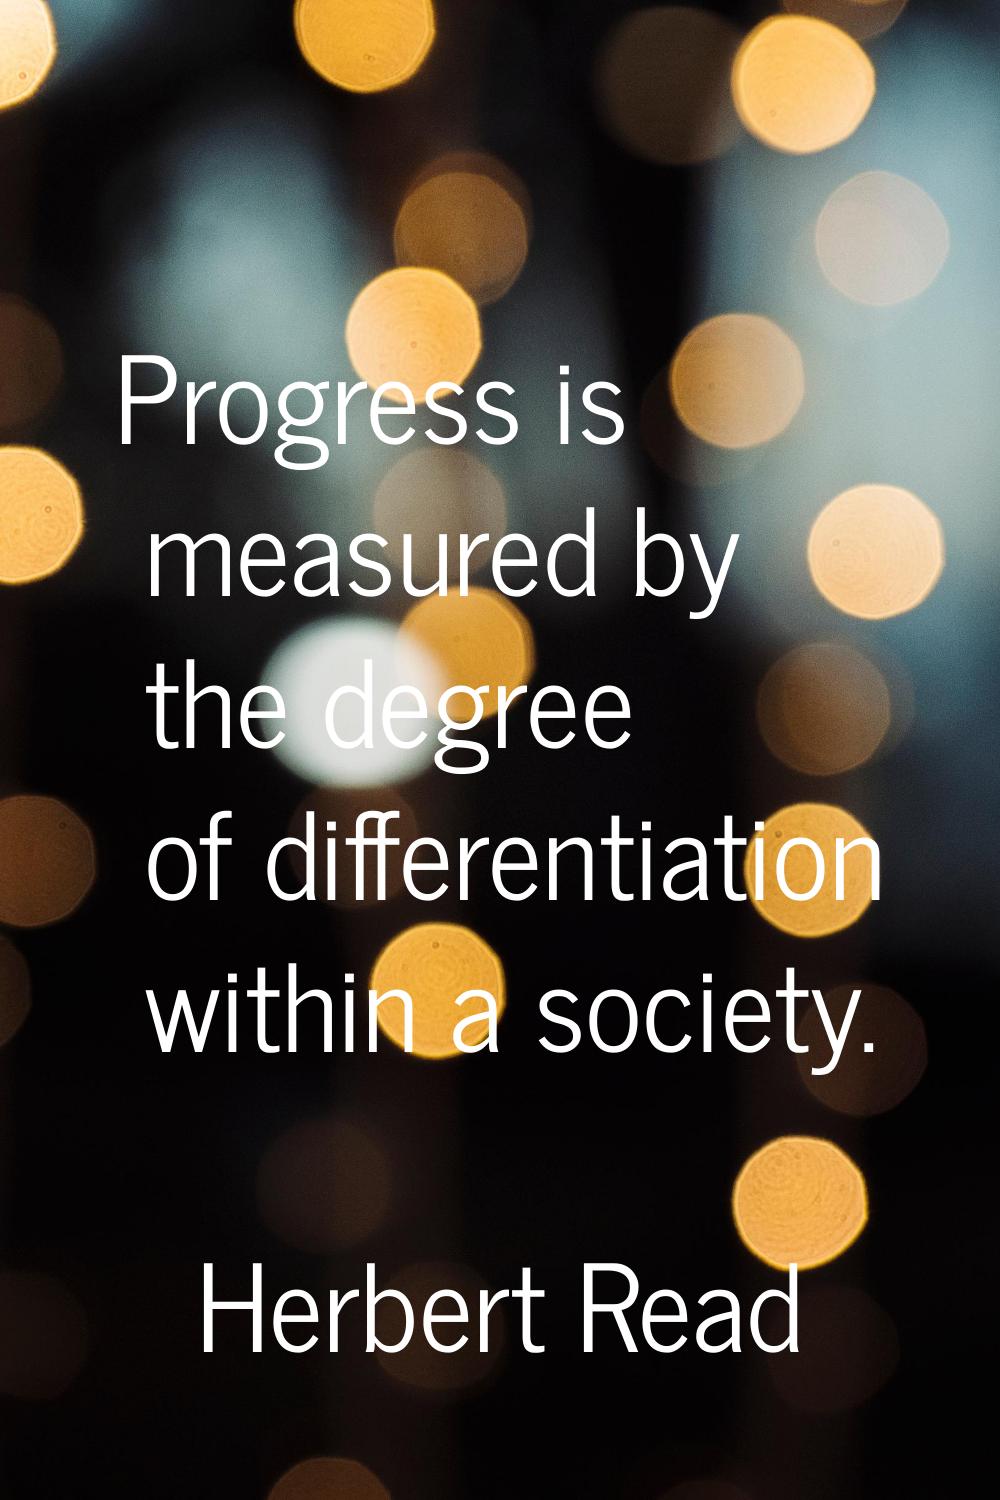 Progress is measured by the degree of differentiation within a society.